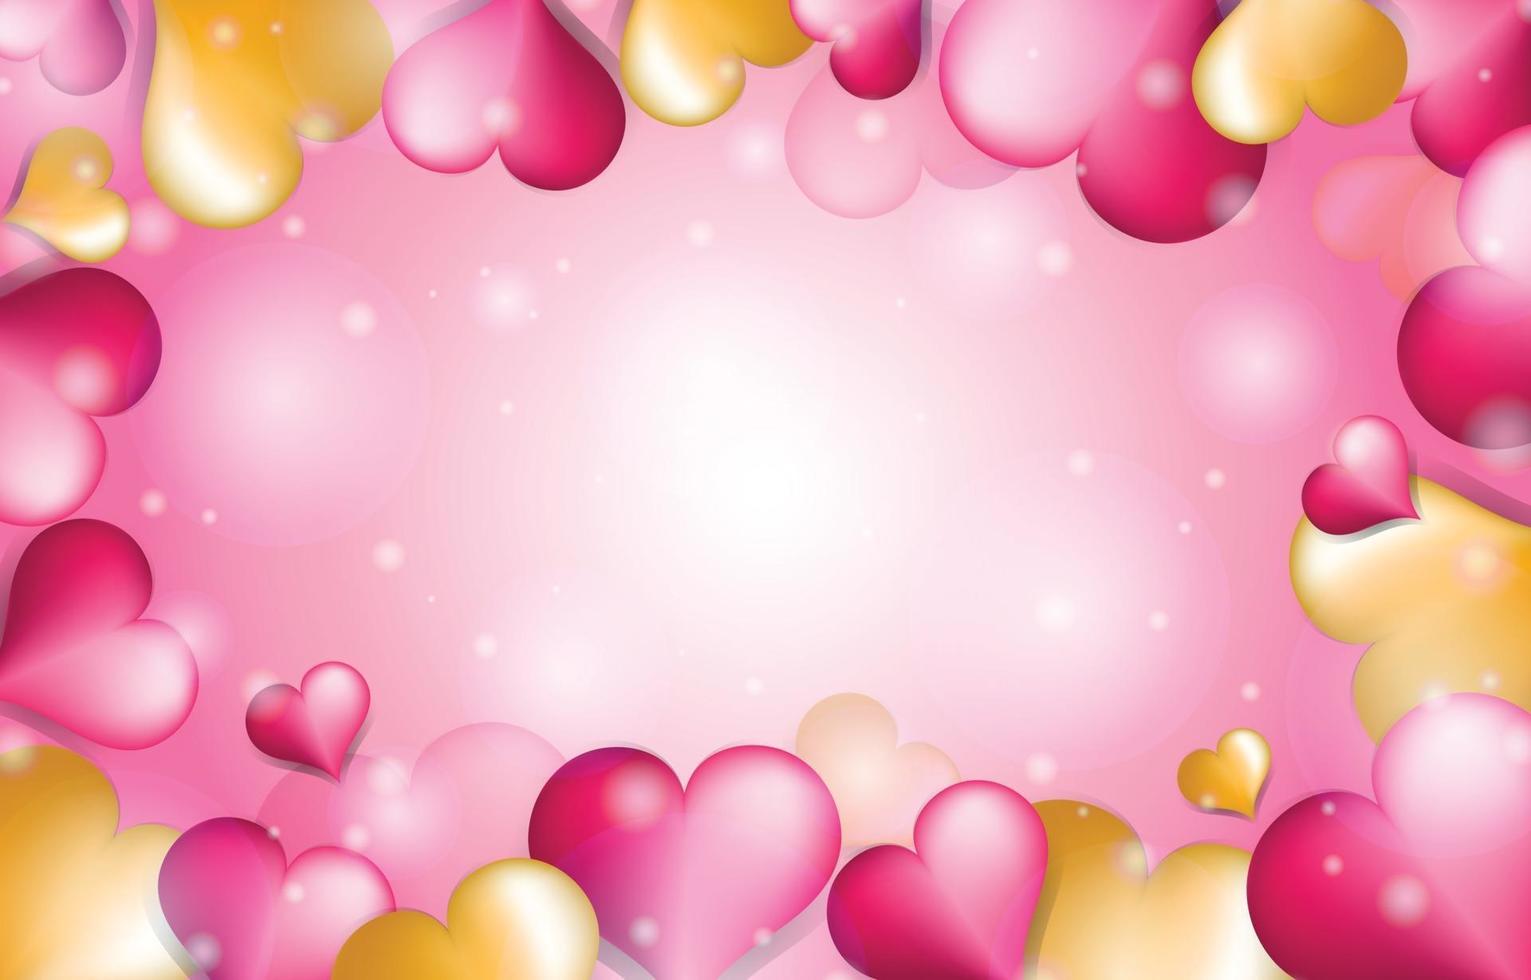 Gold and Pink Heart Background Template vector